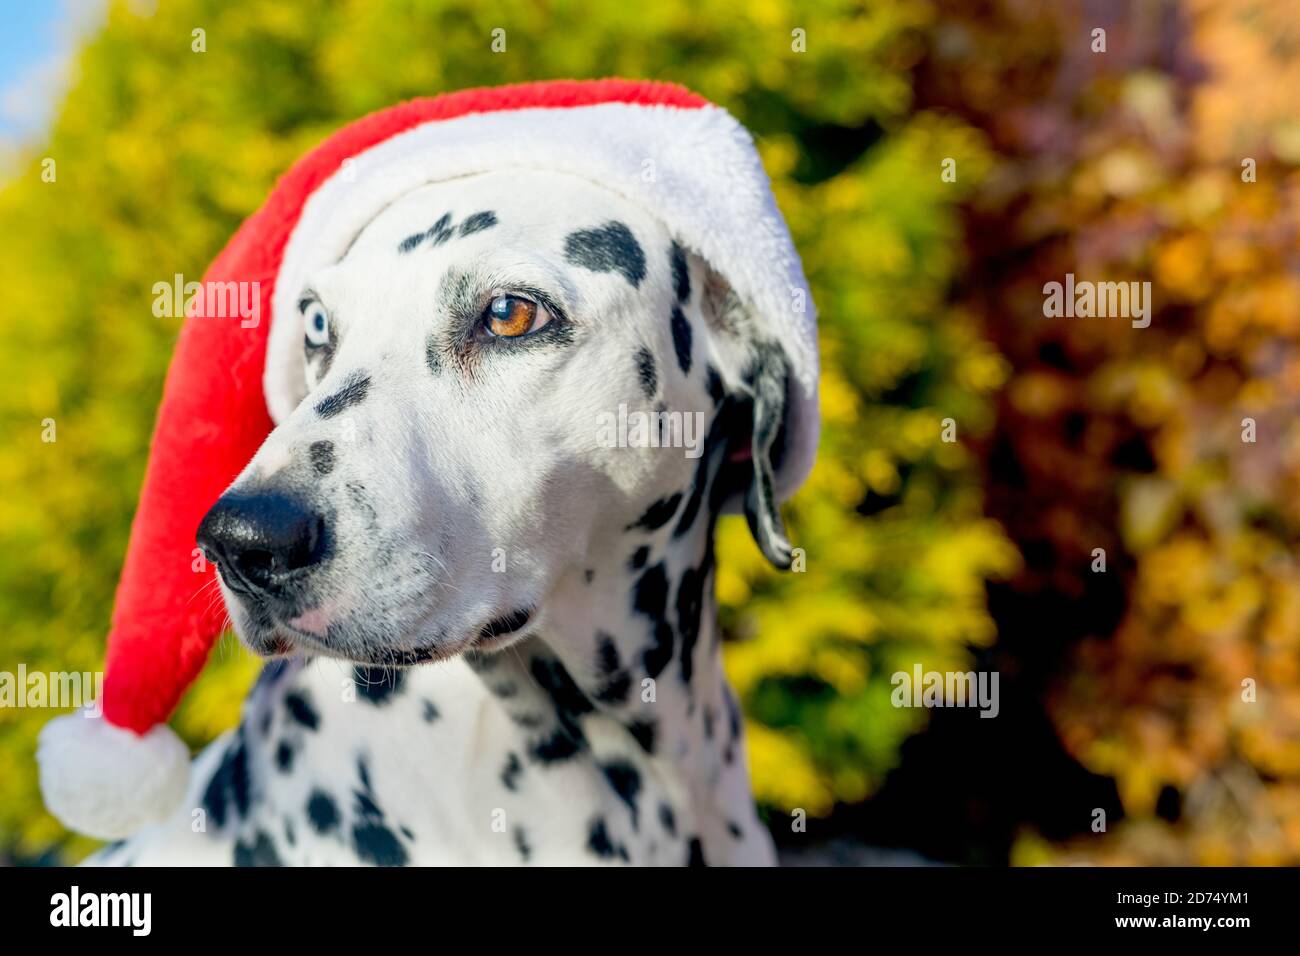 Dalmatian dog in a Santa hat. Dalmatian with heterochromia of the eyes. Outdoor portrait of a purebred dog. A dog with a mottled color. Merry Christmas and Happy New Year. Space for text. Selective focus. Focus on brown eye of the dog. Stock Photo